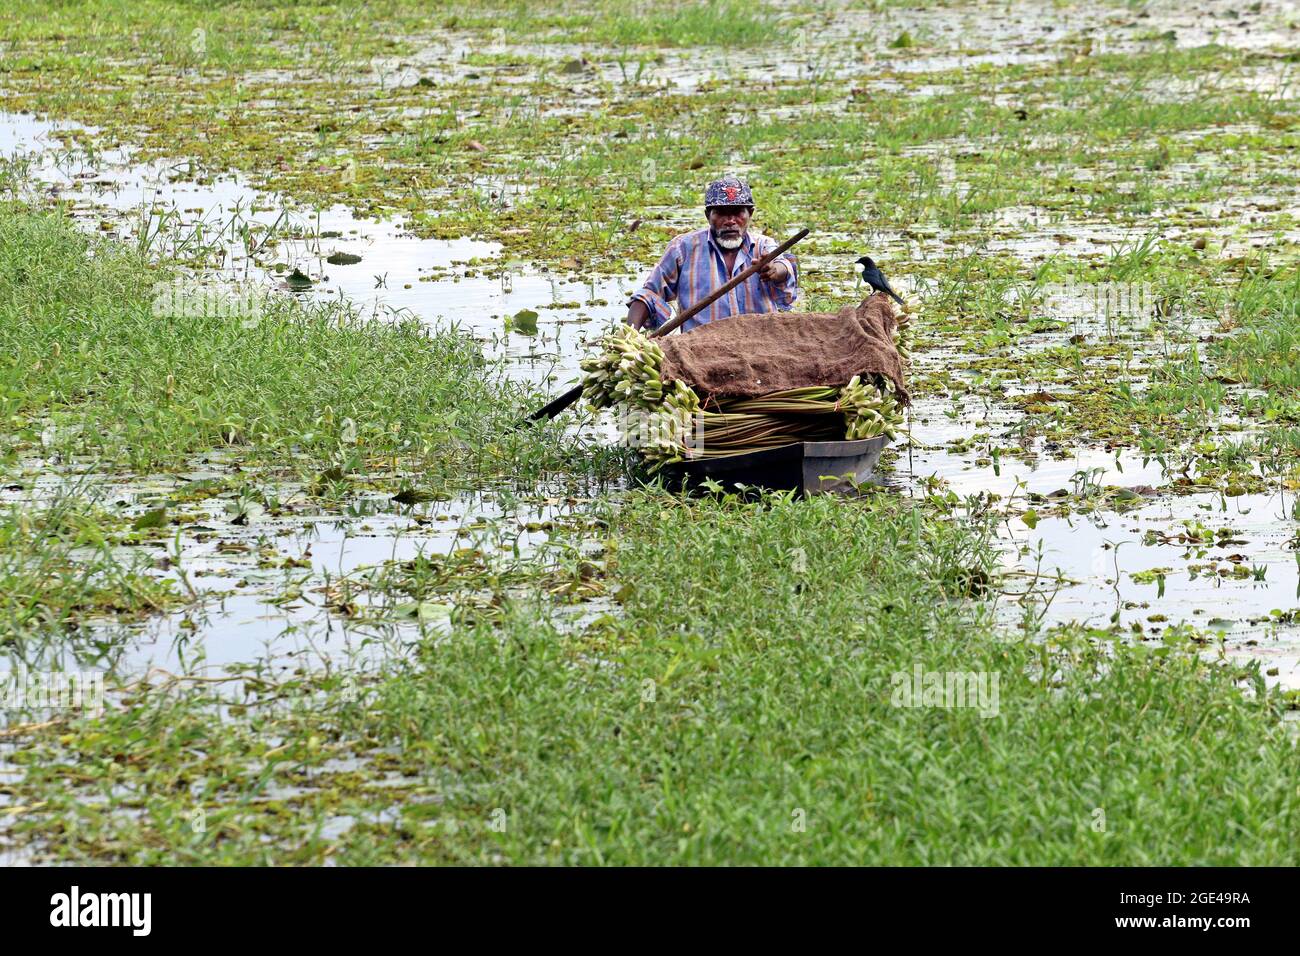 Dhaka, Bangladesh, August 16, 2021: A farmer, collects water lilies on the Munshiganj river to sell them at the local markets amid Covid-19 pandemic. Water Lily is the national flower of Bangladesh, The farmers' economy is based on the amount of production of the water lily, the cultivation of this flower is done for 5 months a year, which is the time they have to collect the largest number of lilies to put them on sale. Credit: Habibur Rahman / Eyepix Group/Alamy Live News Stock Photo